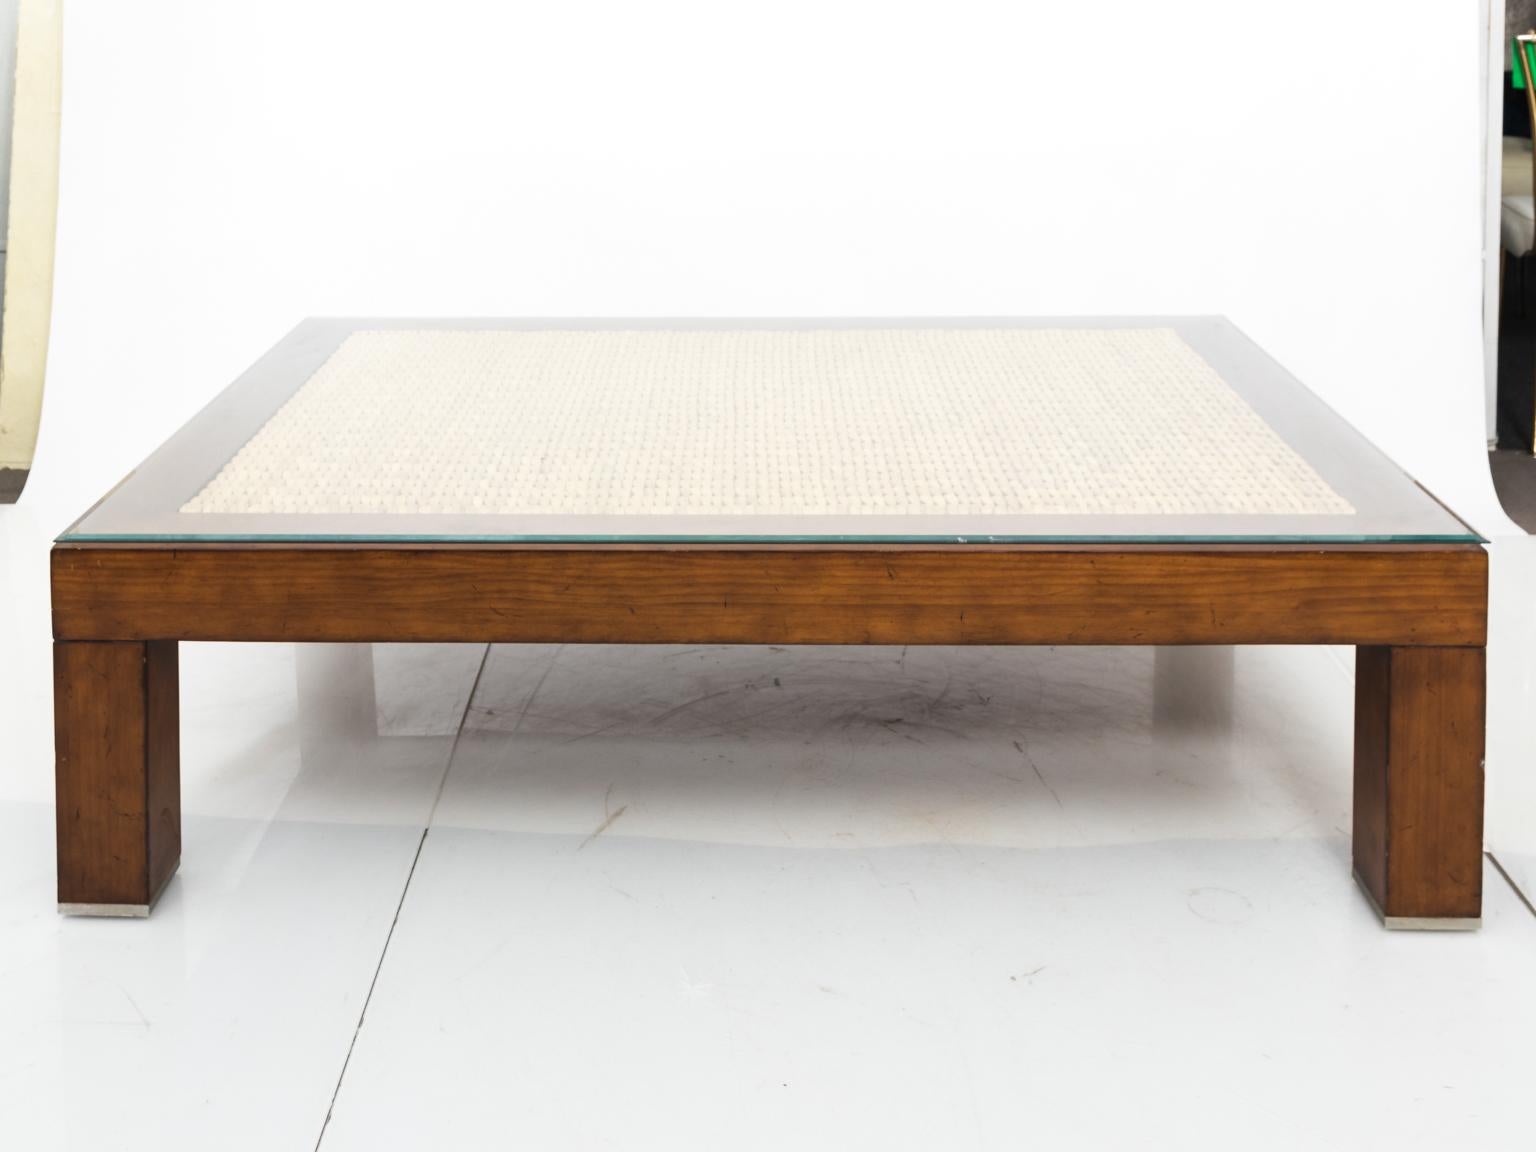 Ralph Lauren coffee table with woven rush panel and glass top, circa late 20th century. Please note of wear consistent with age due to daily use including minor surface scratches.